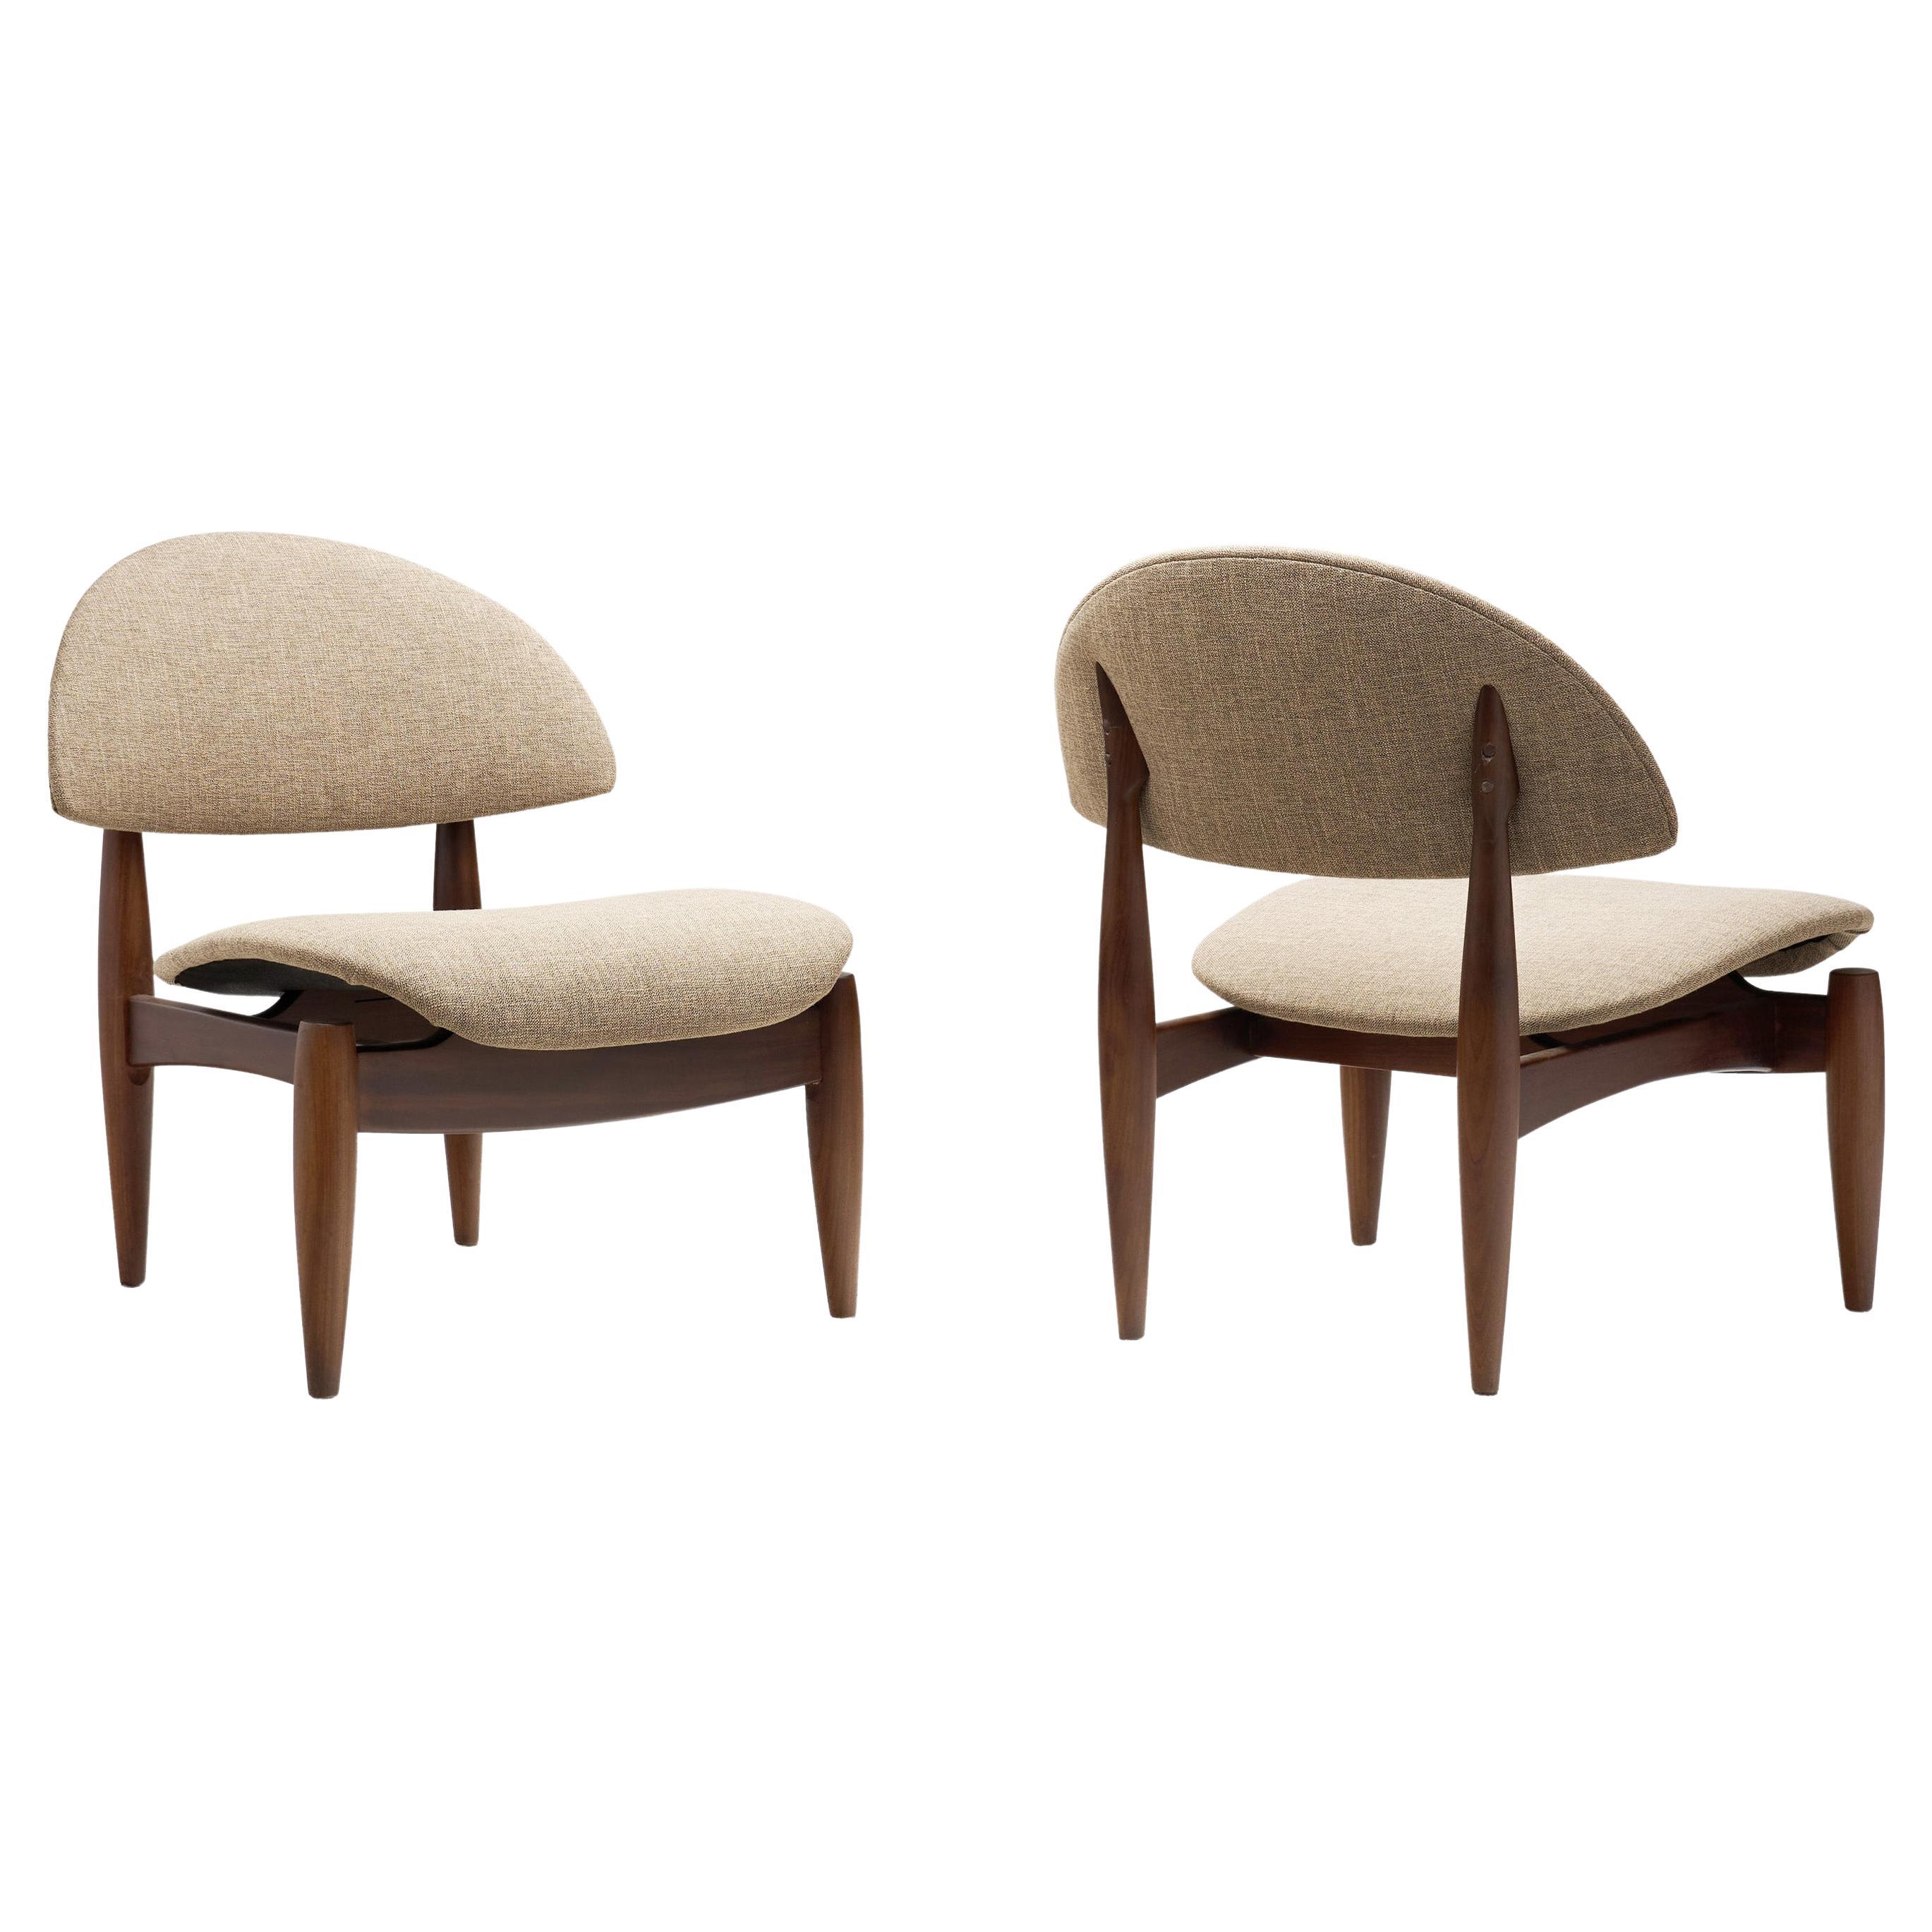 European Mid-Century Modern "Oyster" Chairs, Europe ca 1950s